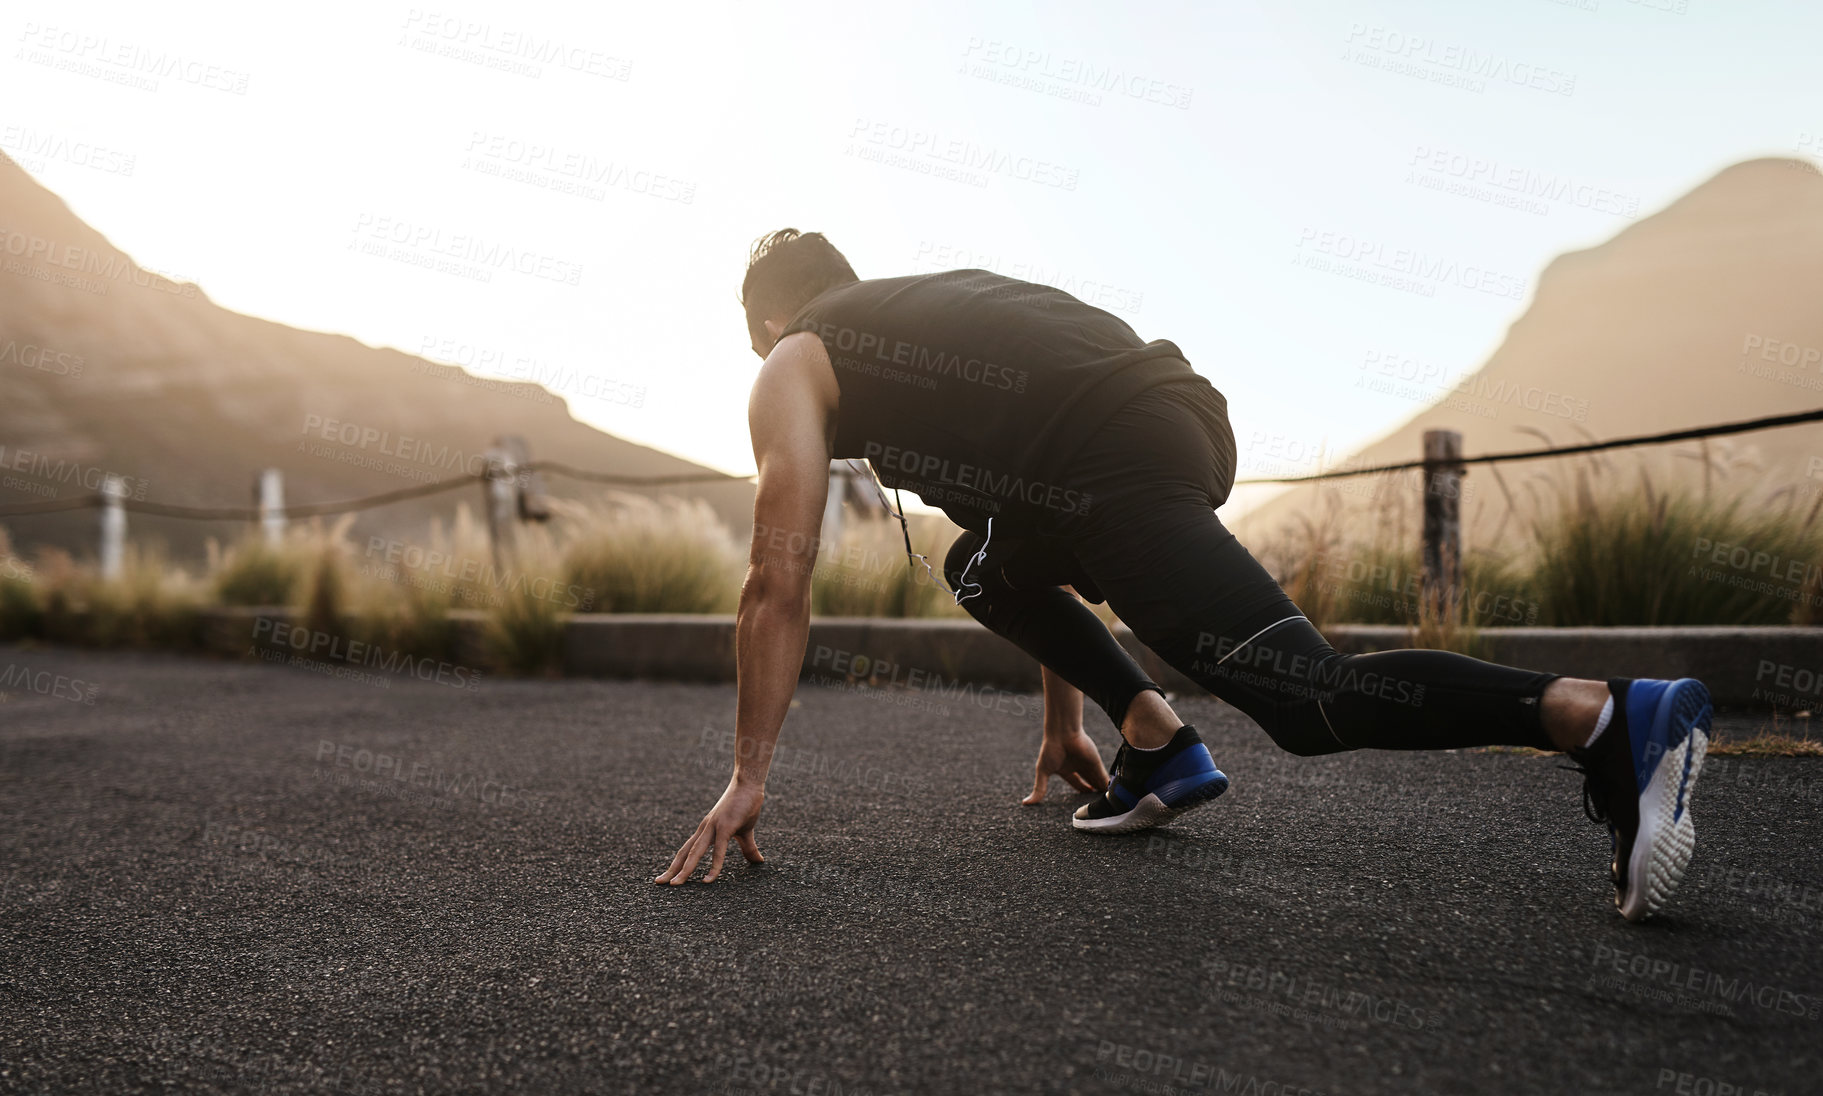 Buy stock photo Rearview shot of a sporty young man in starting position while exercising outdoors